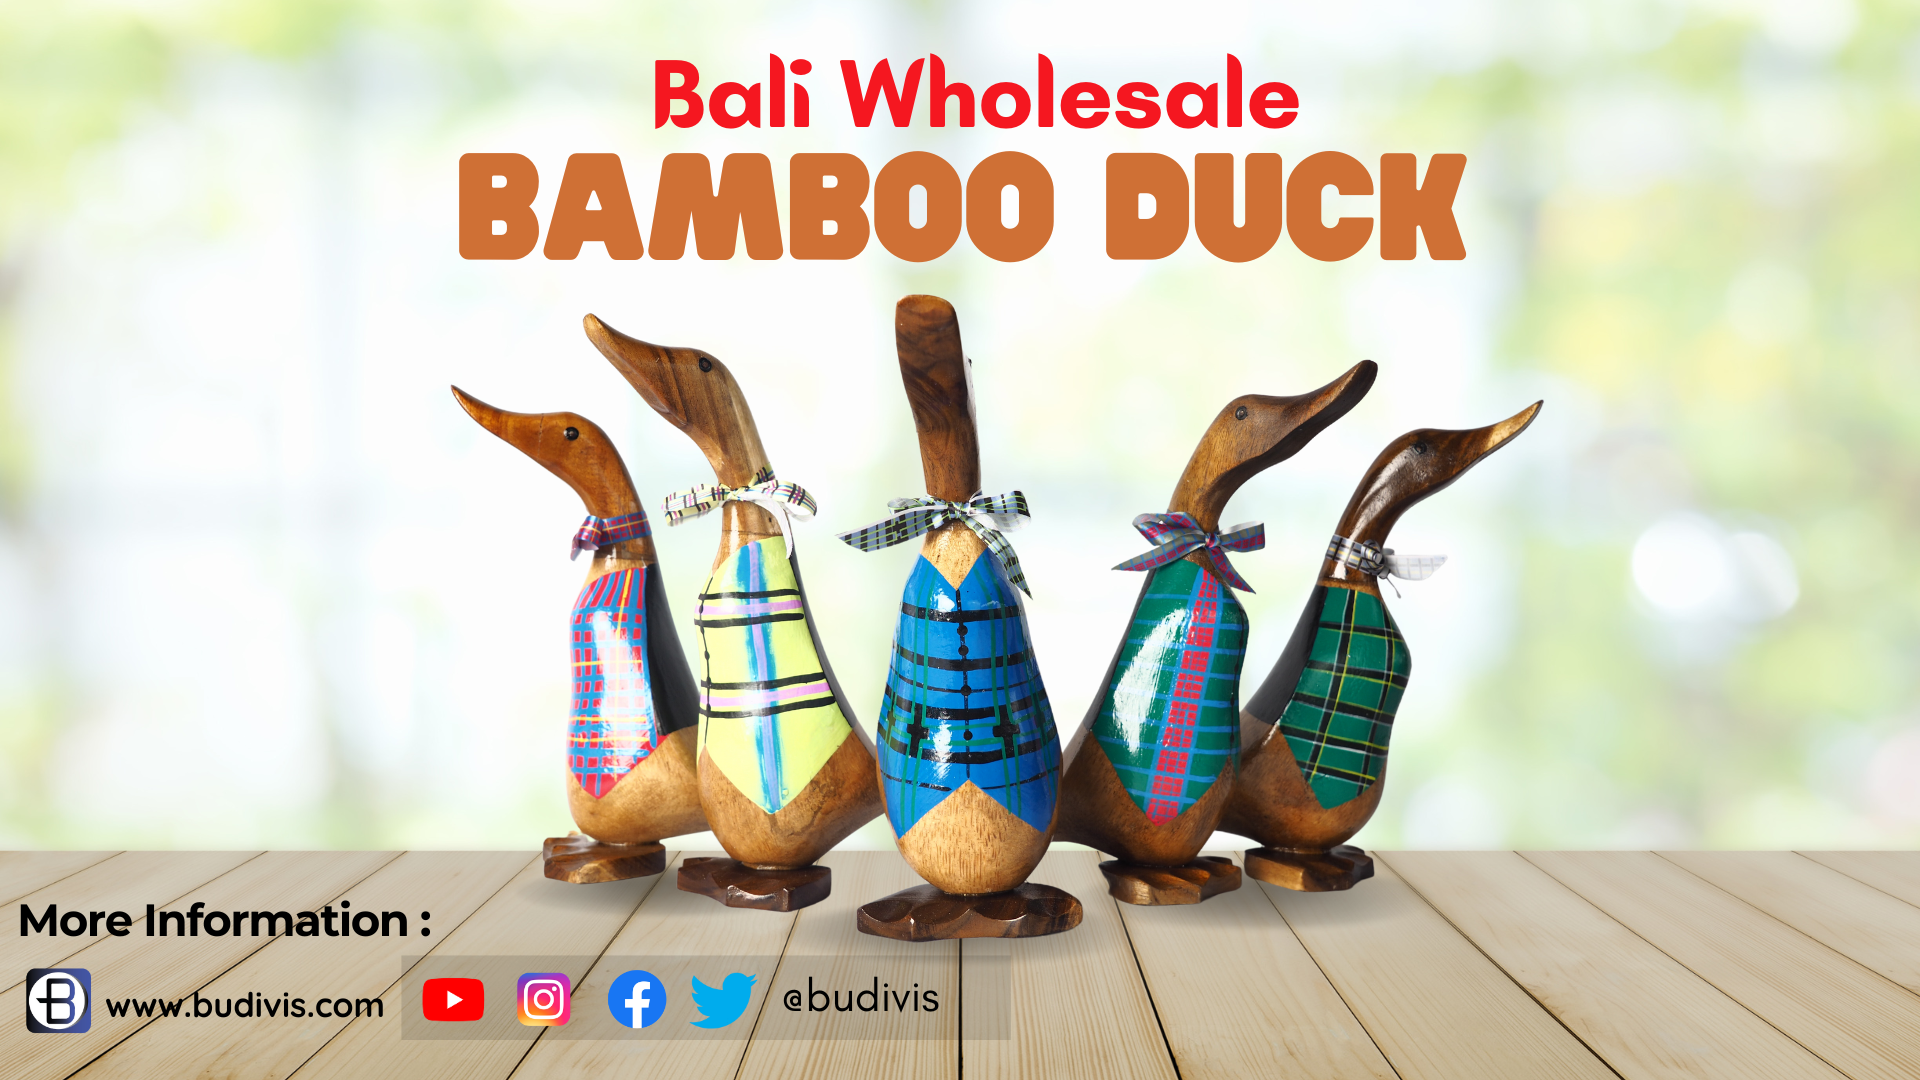 https://www.budivis.com/image/cache/catalog/A%20Blog/A%20blog%20pic/new/Bamboo%20Duck-1920x1080.png